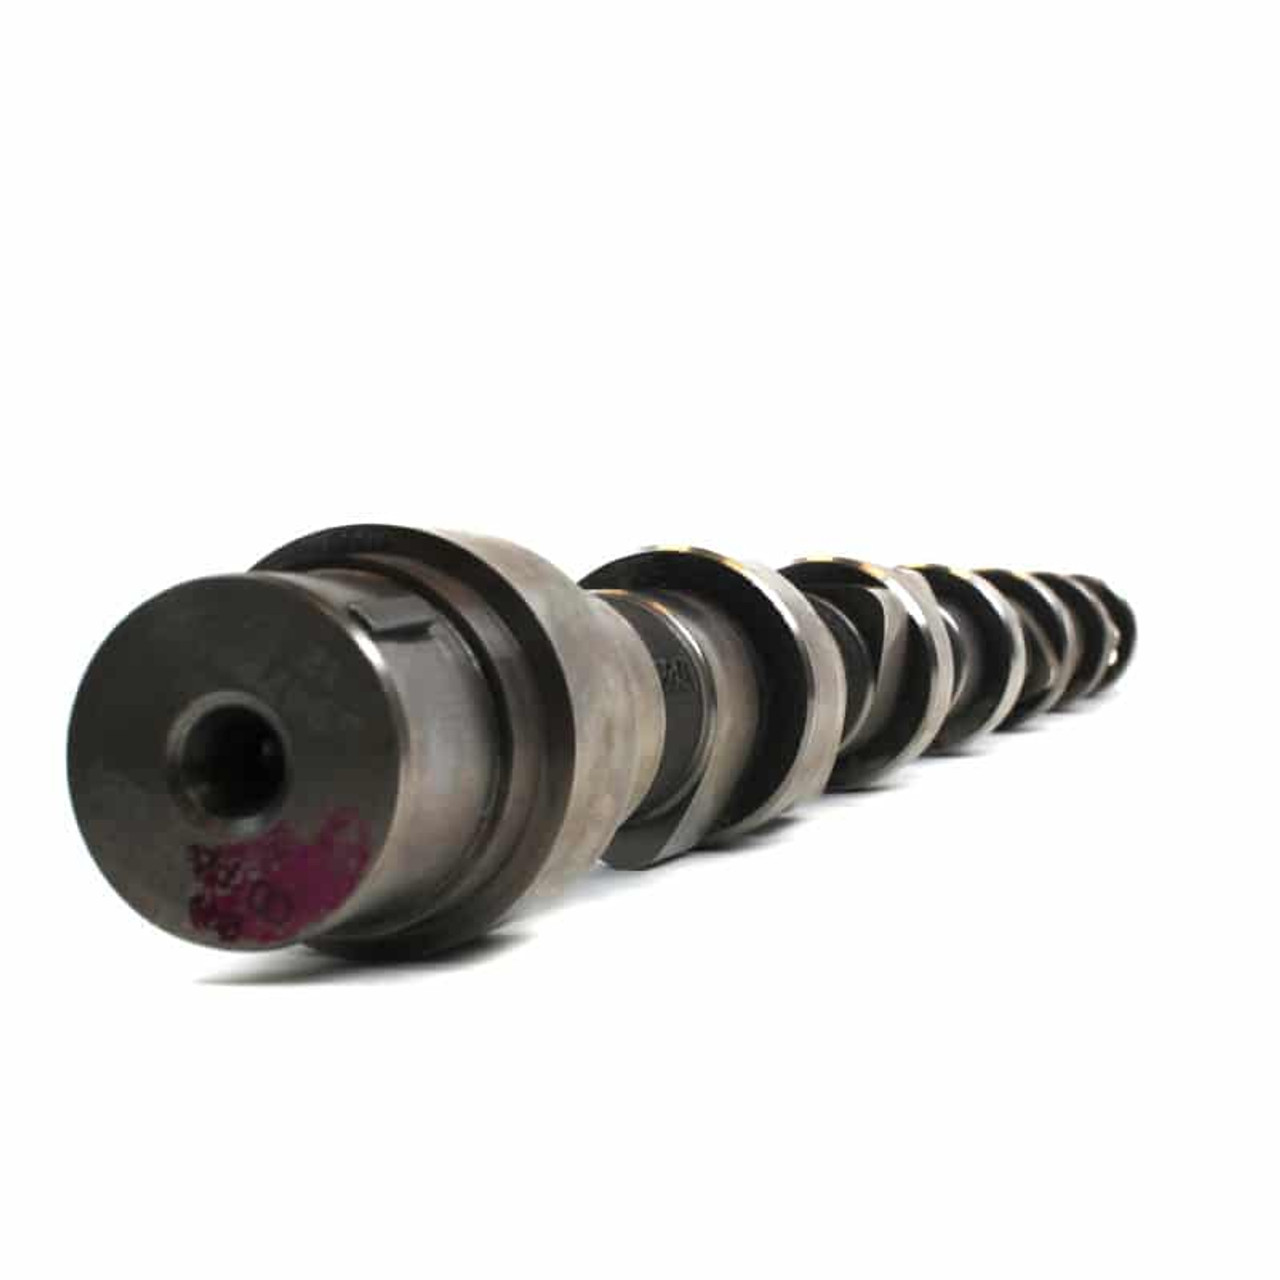  Industrial Injection CR Cummins Stage 2 Camshaft (210/220) for 2013 to 2018 6.7L Cummins (PDM-770HP)- This View